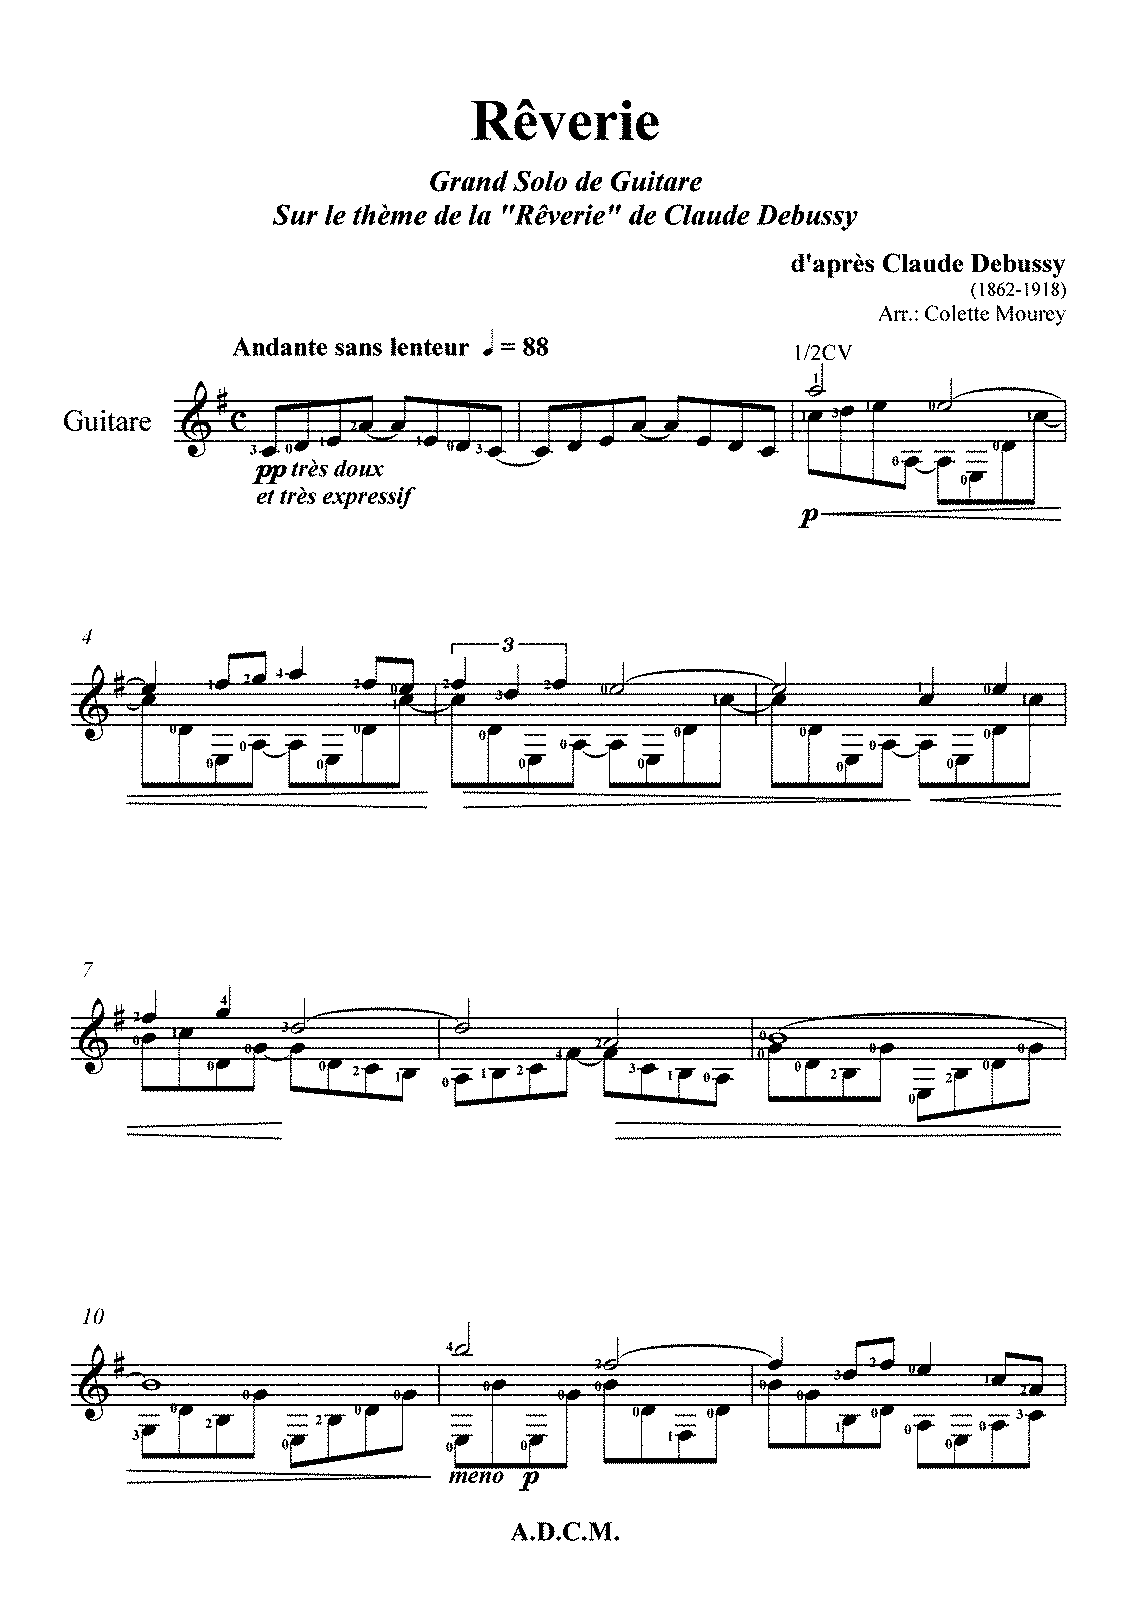 what is the style in music composition of claude debussy